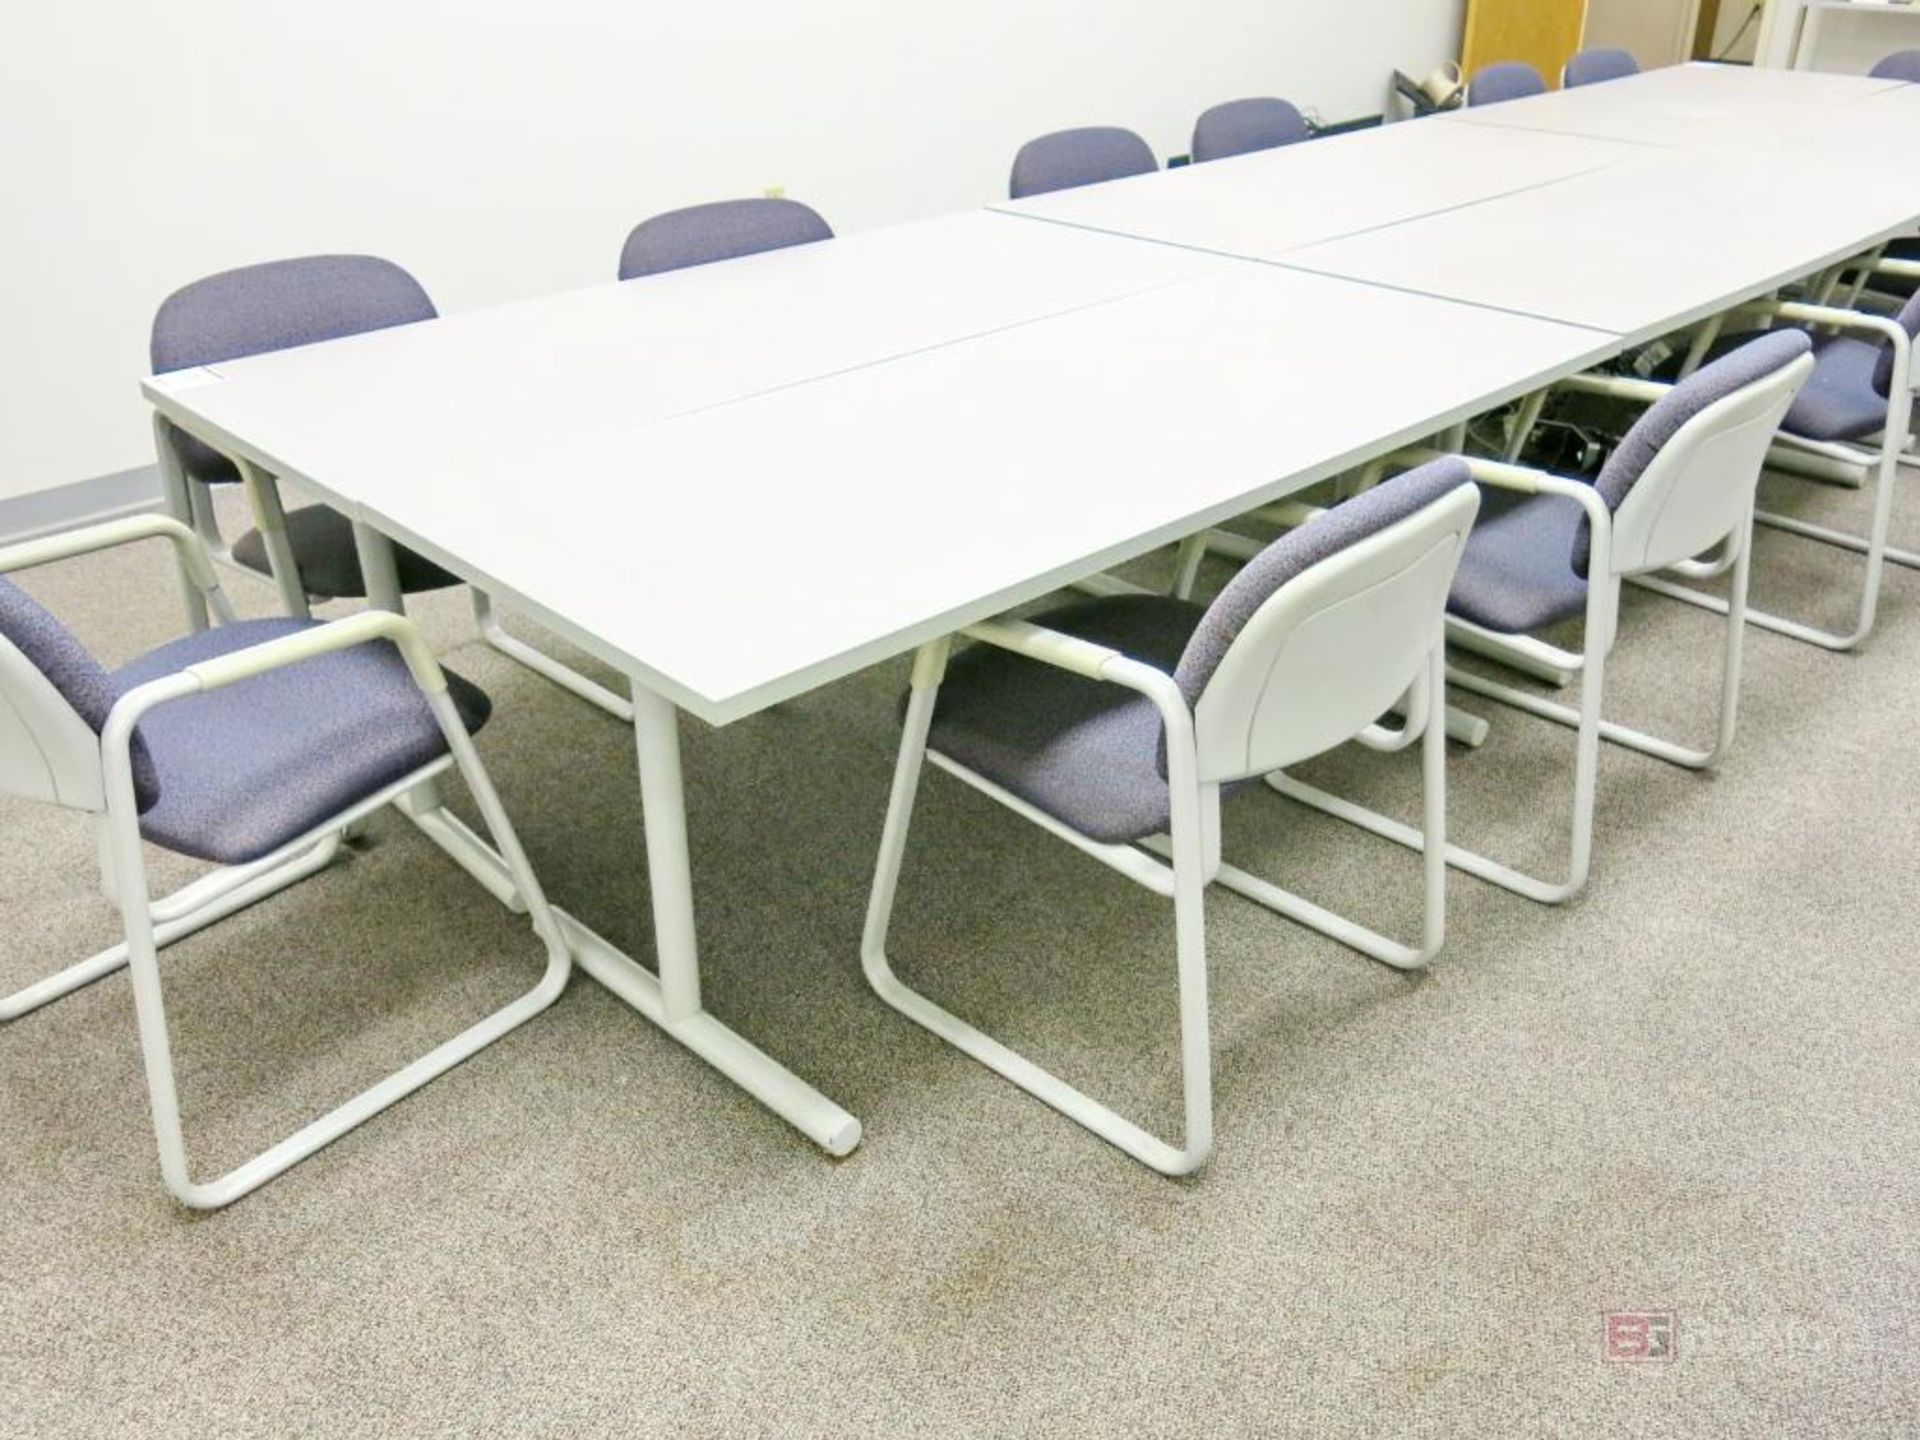 Contents of Conference Room - Image 8 of 8